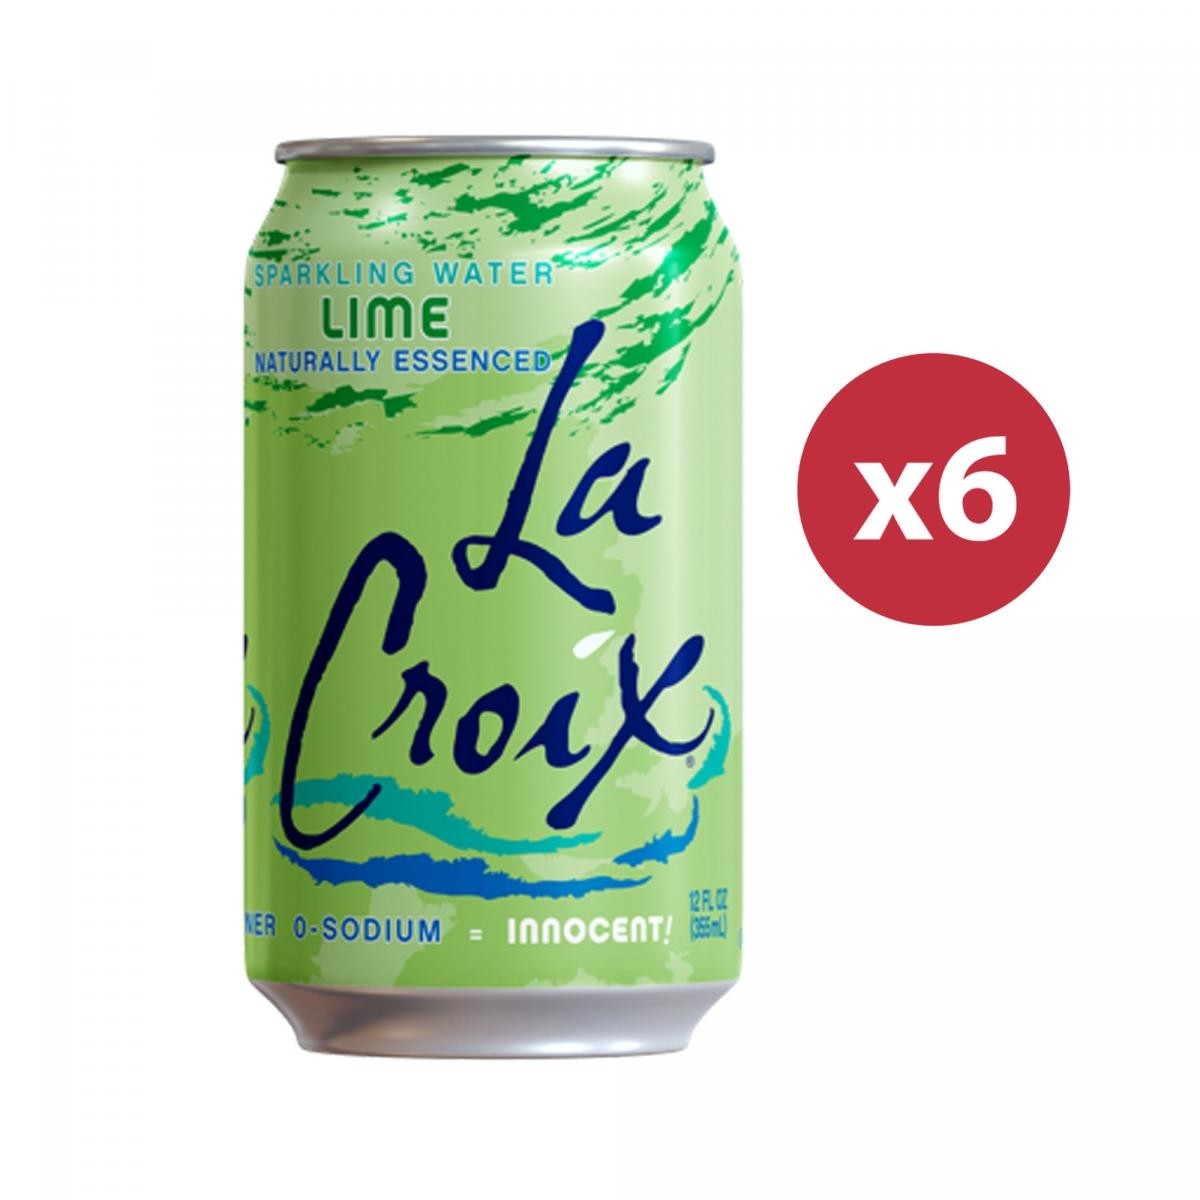  LACROIX - 青檸天然精華蘇打水 (六罐裝) Lime Naturally Essenced Sparkling Water (6 cans)